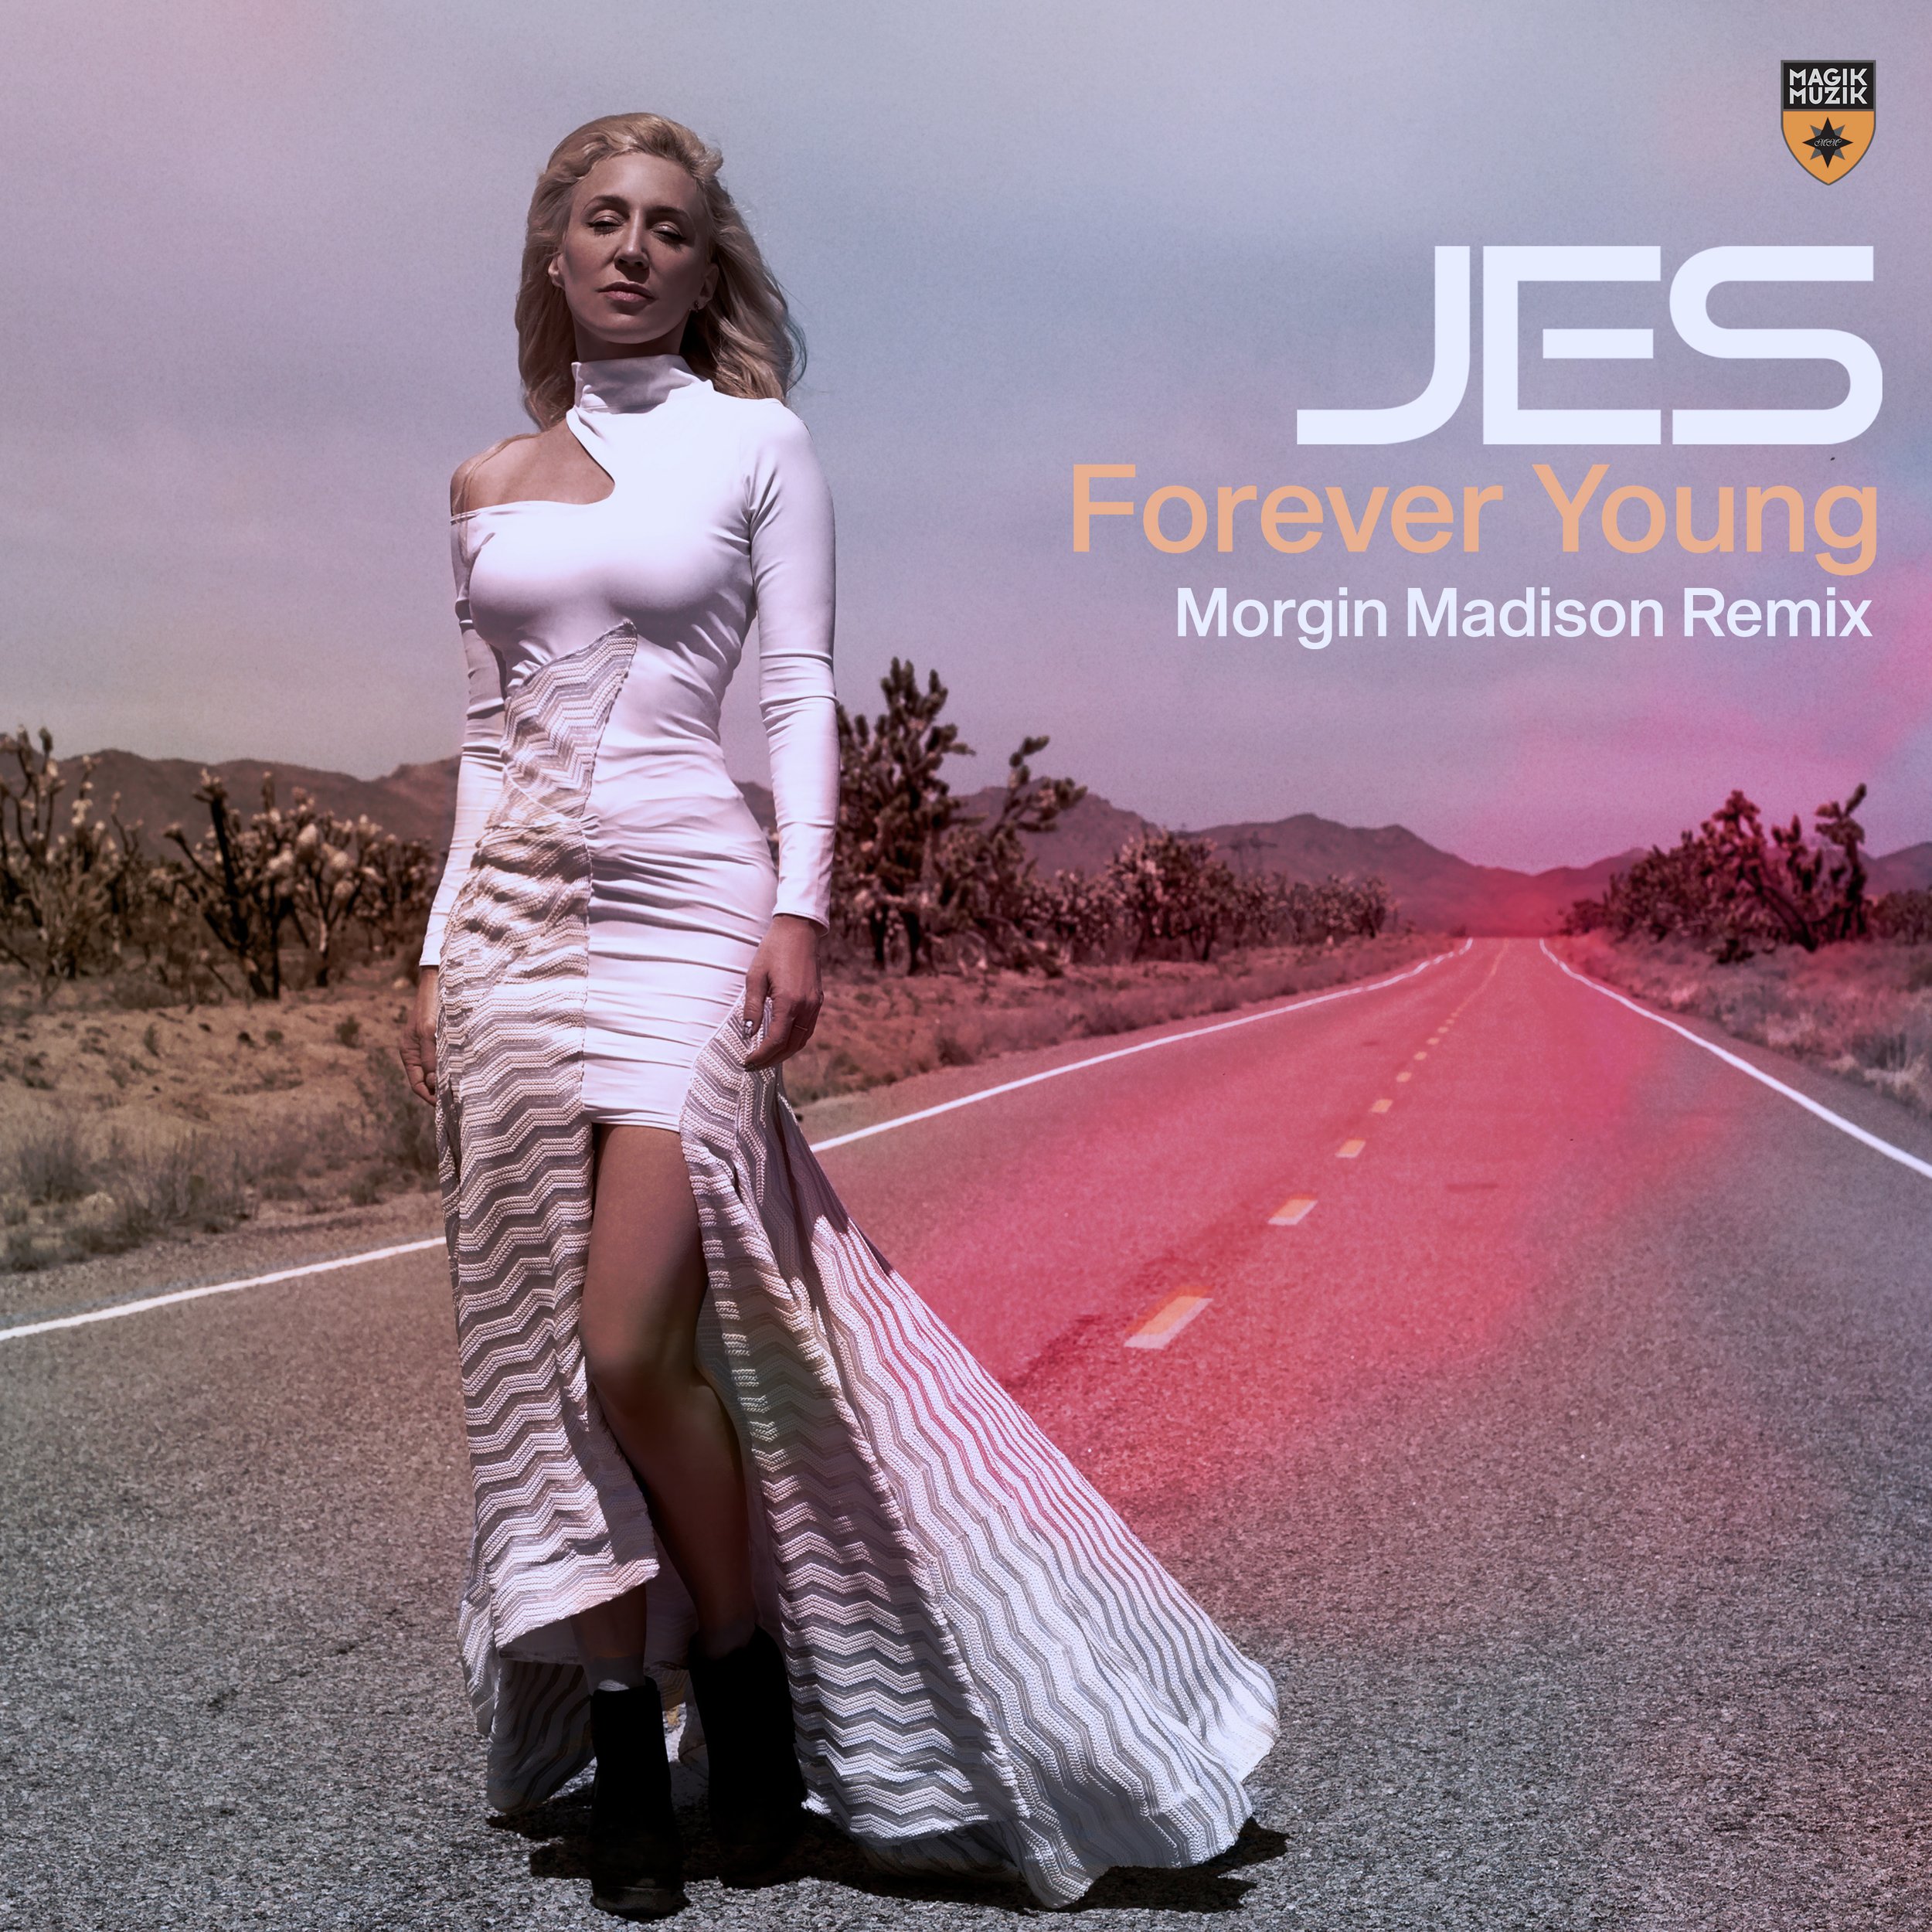 JES - Forever Young (Morgin Madison Remix)